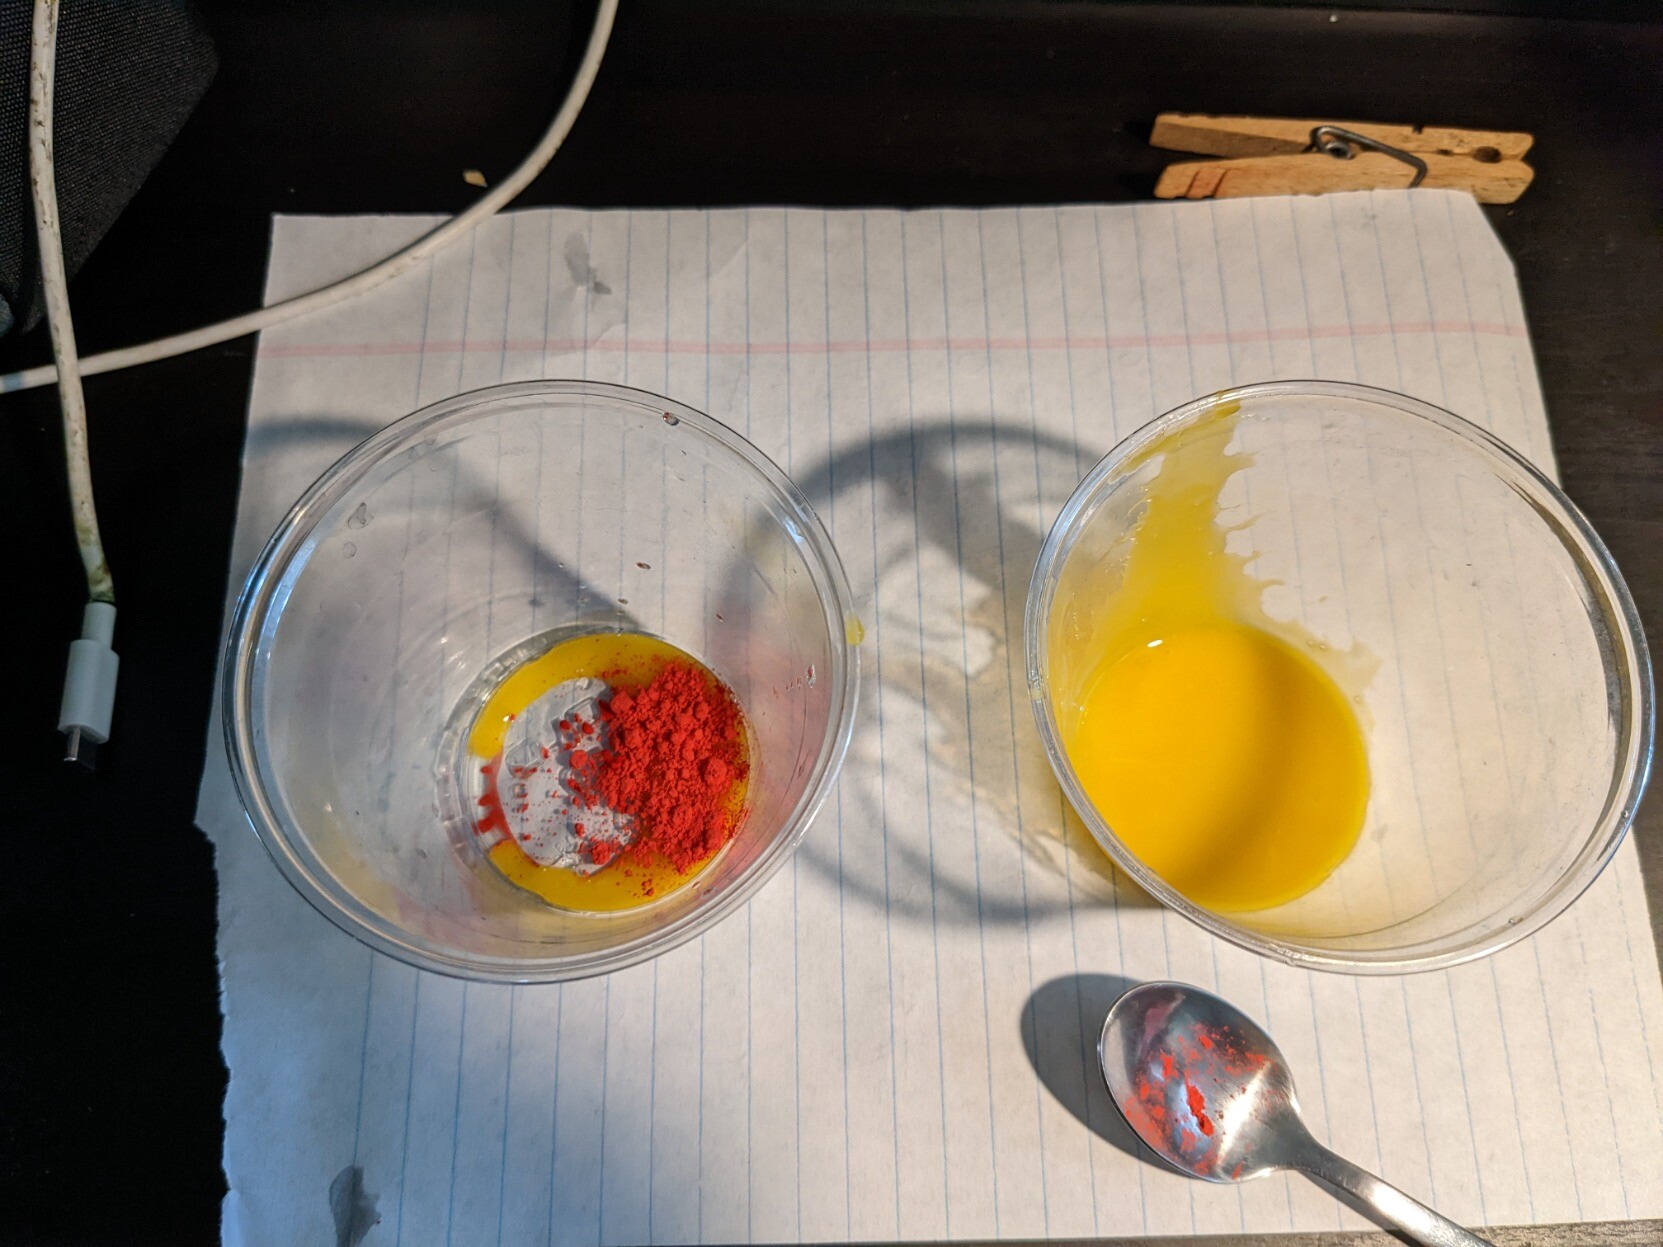 Two plastic cups with a broken egg yolk in each. In one of them is a red powder, which is bleeding in a bit in a kind of sunset-y way.